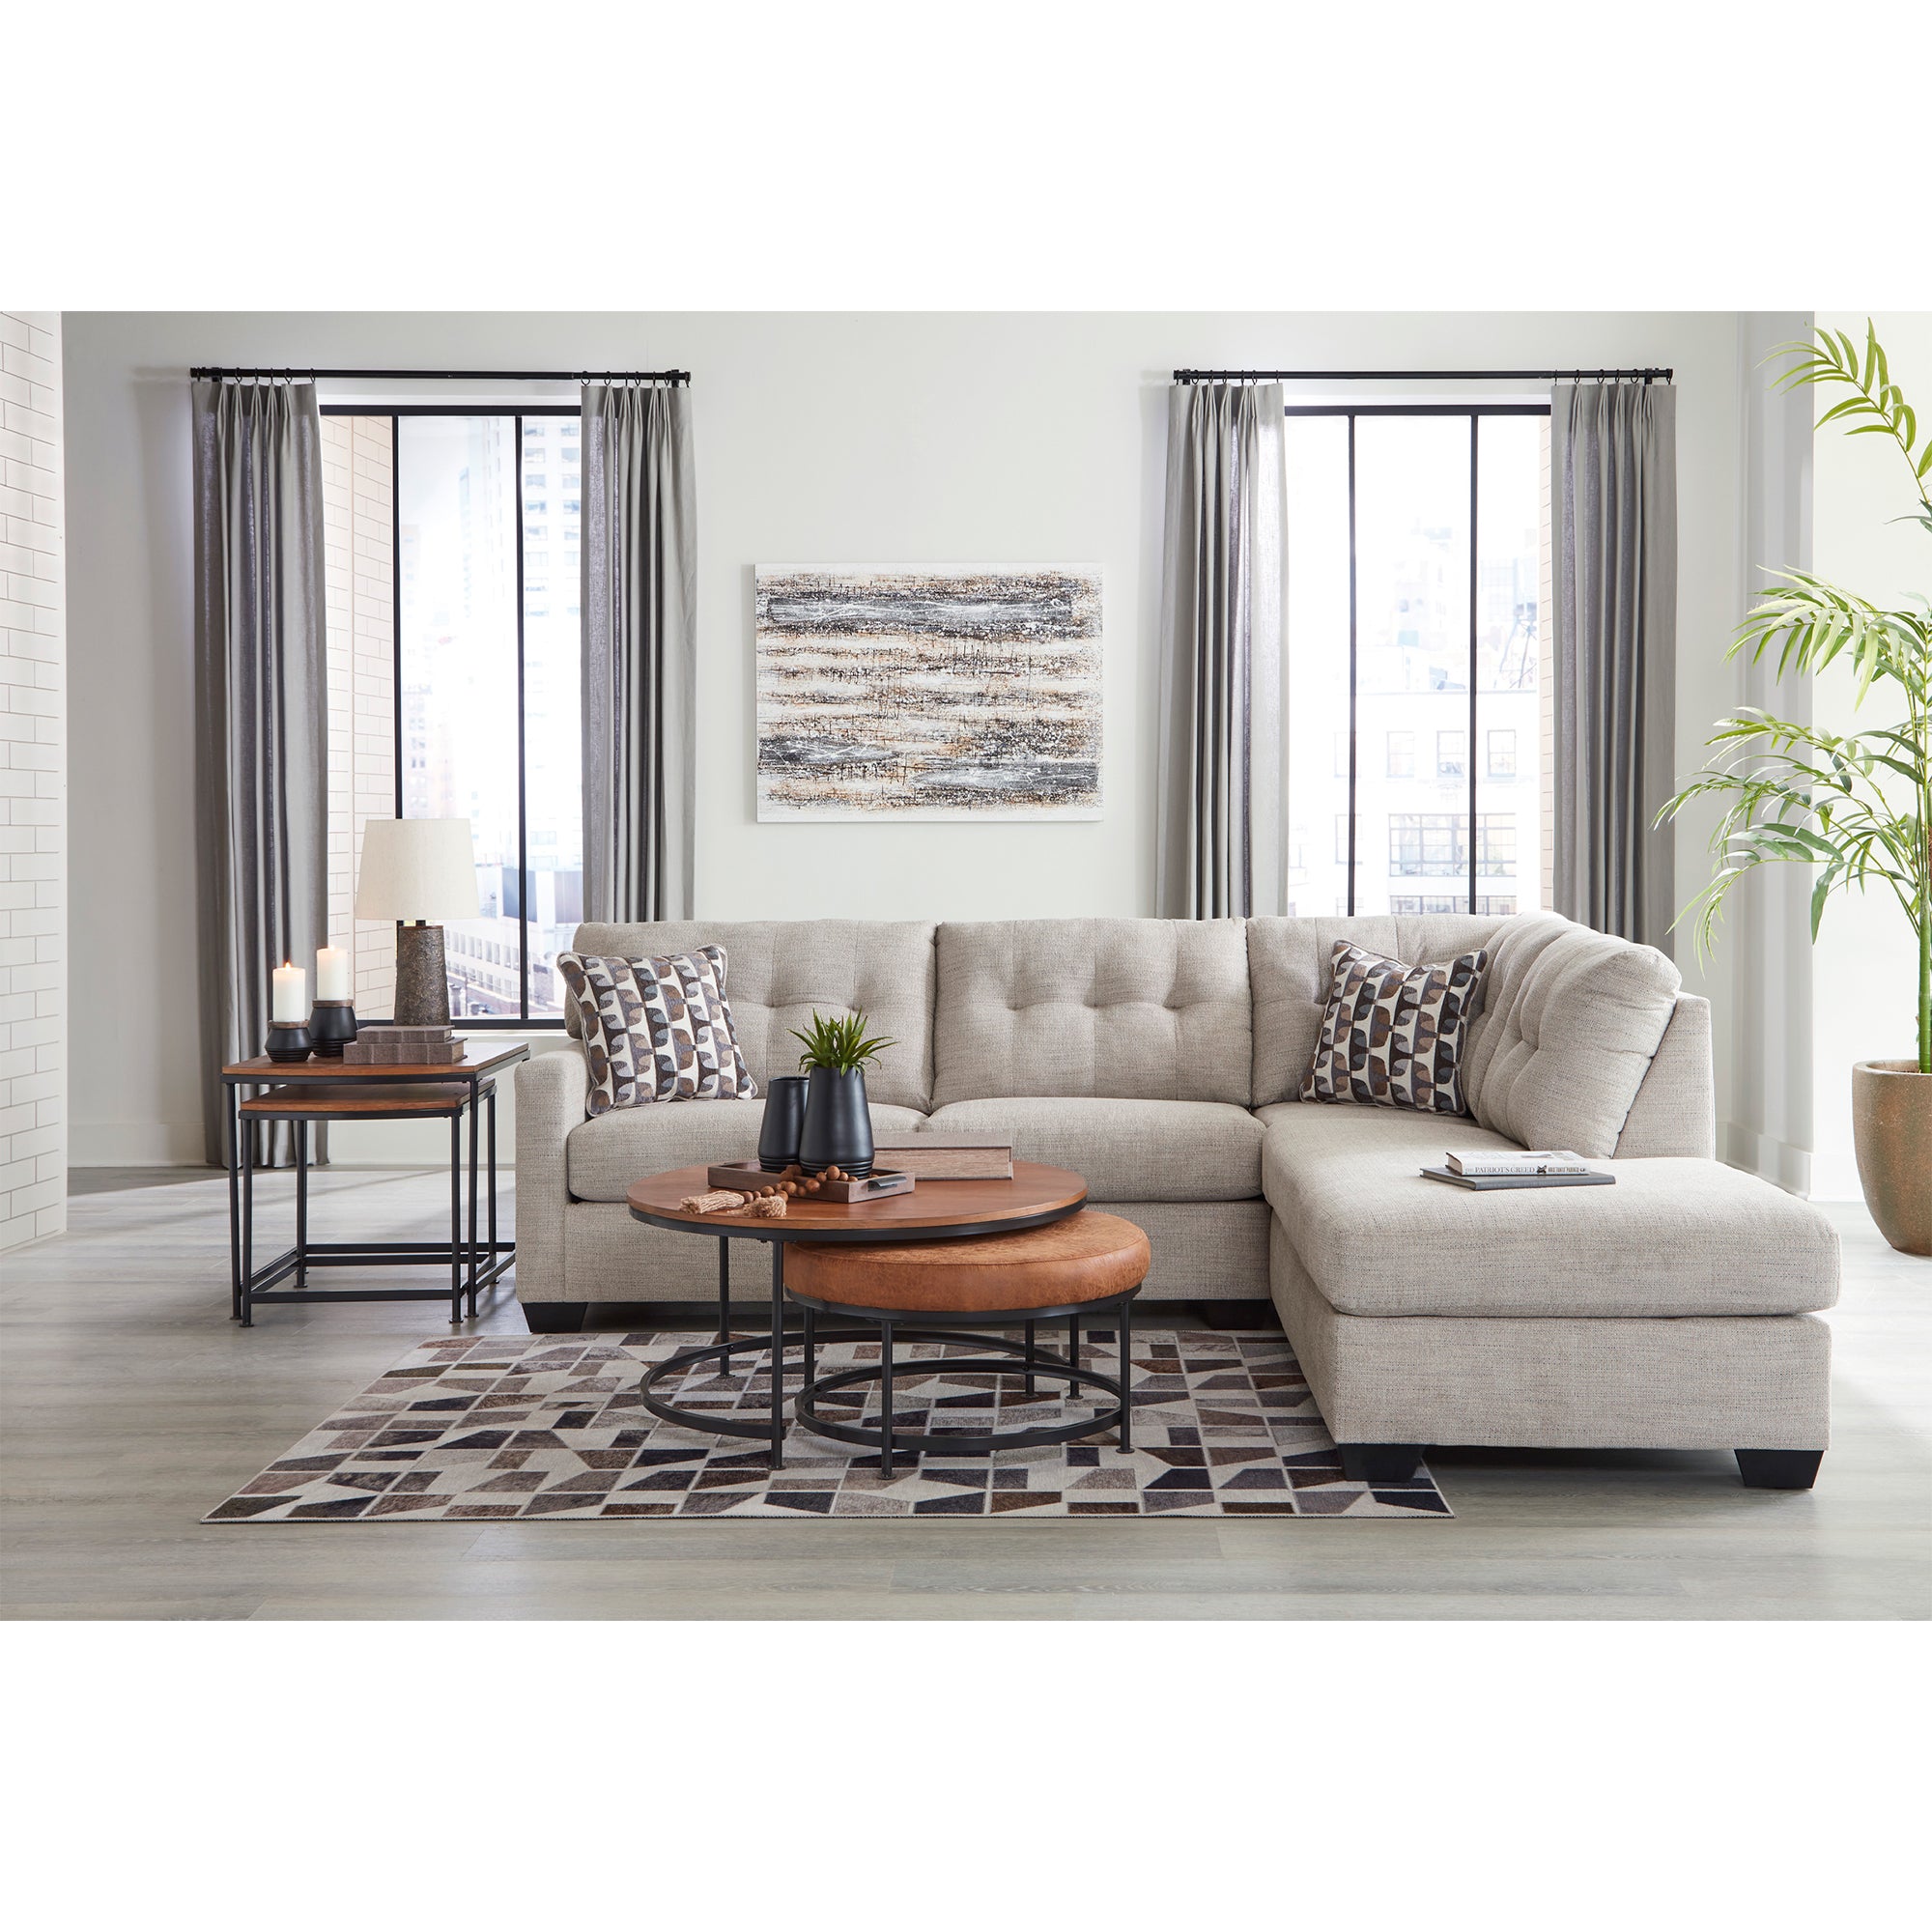 Chic Mahoney 2-Piece Sectional with spacious chaise in pebble, enhances any Milwaukee living area